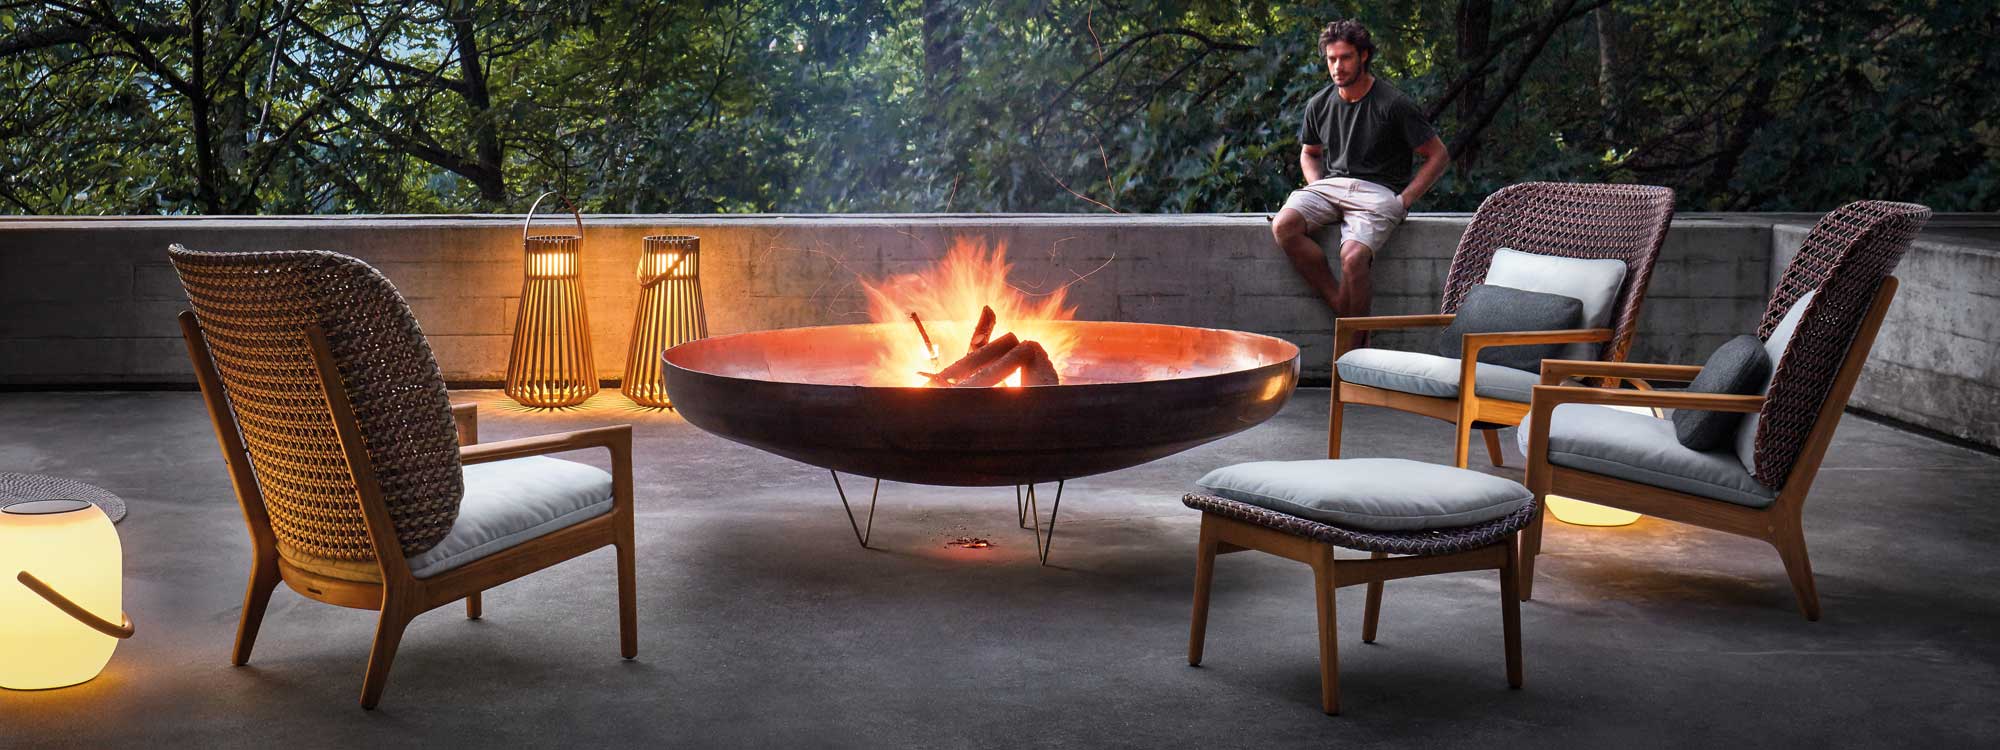 Image of Gloster Kay modern garden lounge furniture on terrace, placed around fire pit with dancing flames within